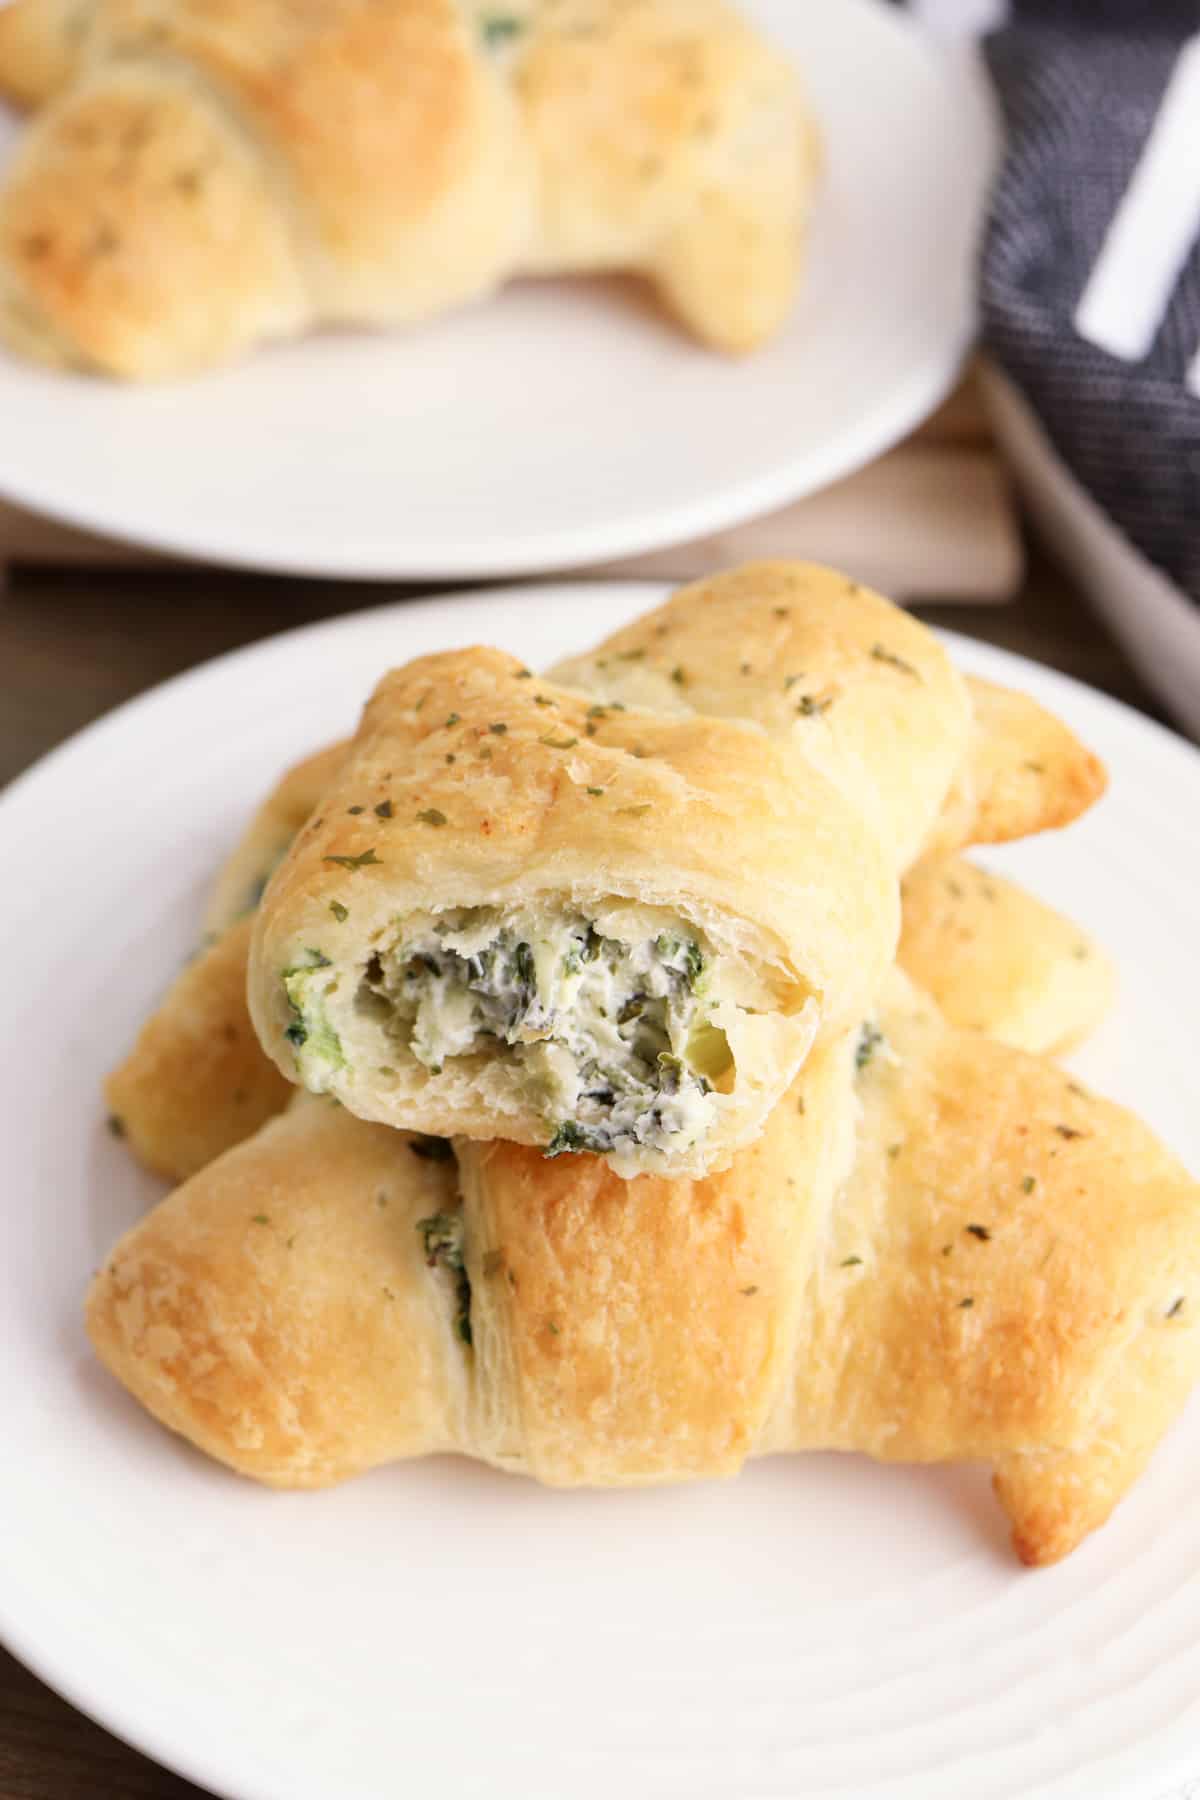 Three spinach artichoke crescent rolls on a plate, one with a bite taken out of it to show the creamy and cheesy spinach dip inside of it.